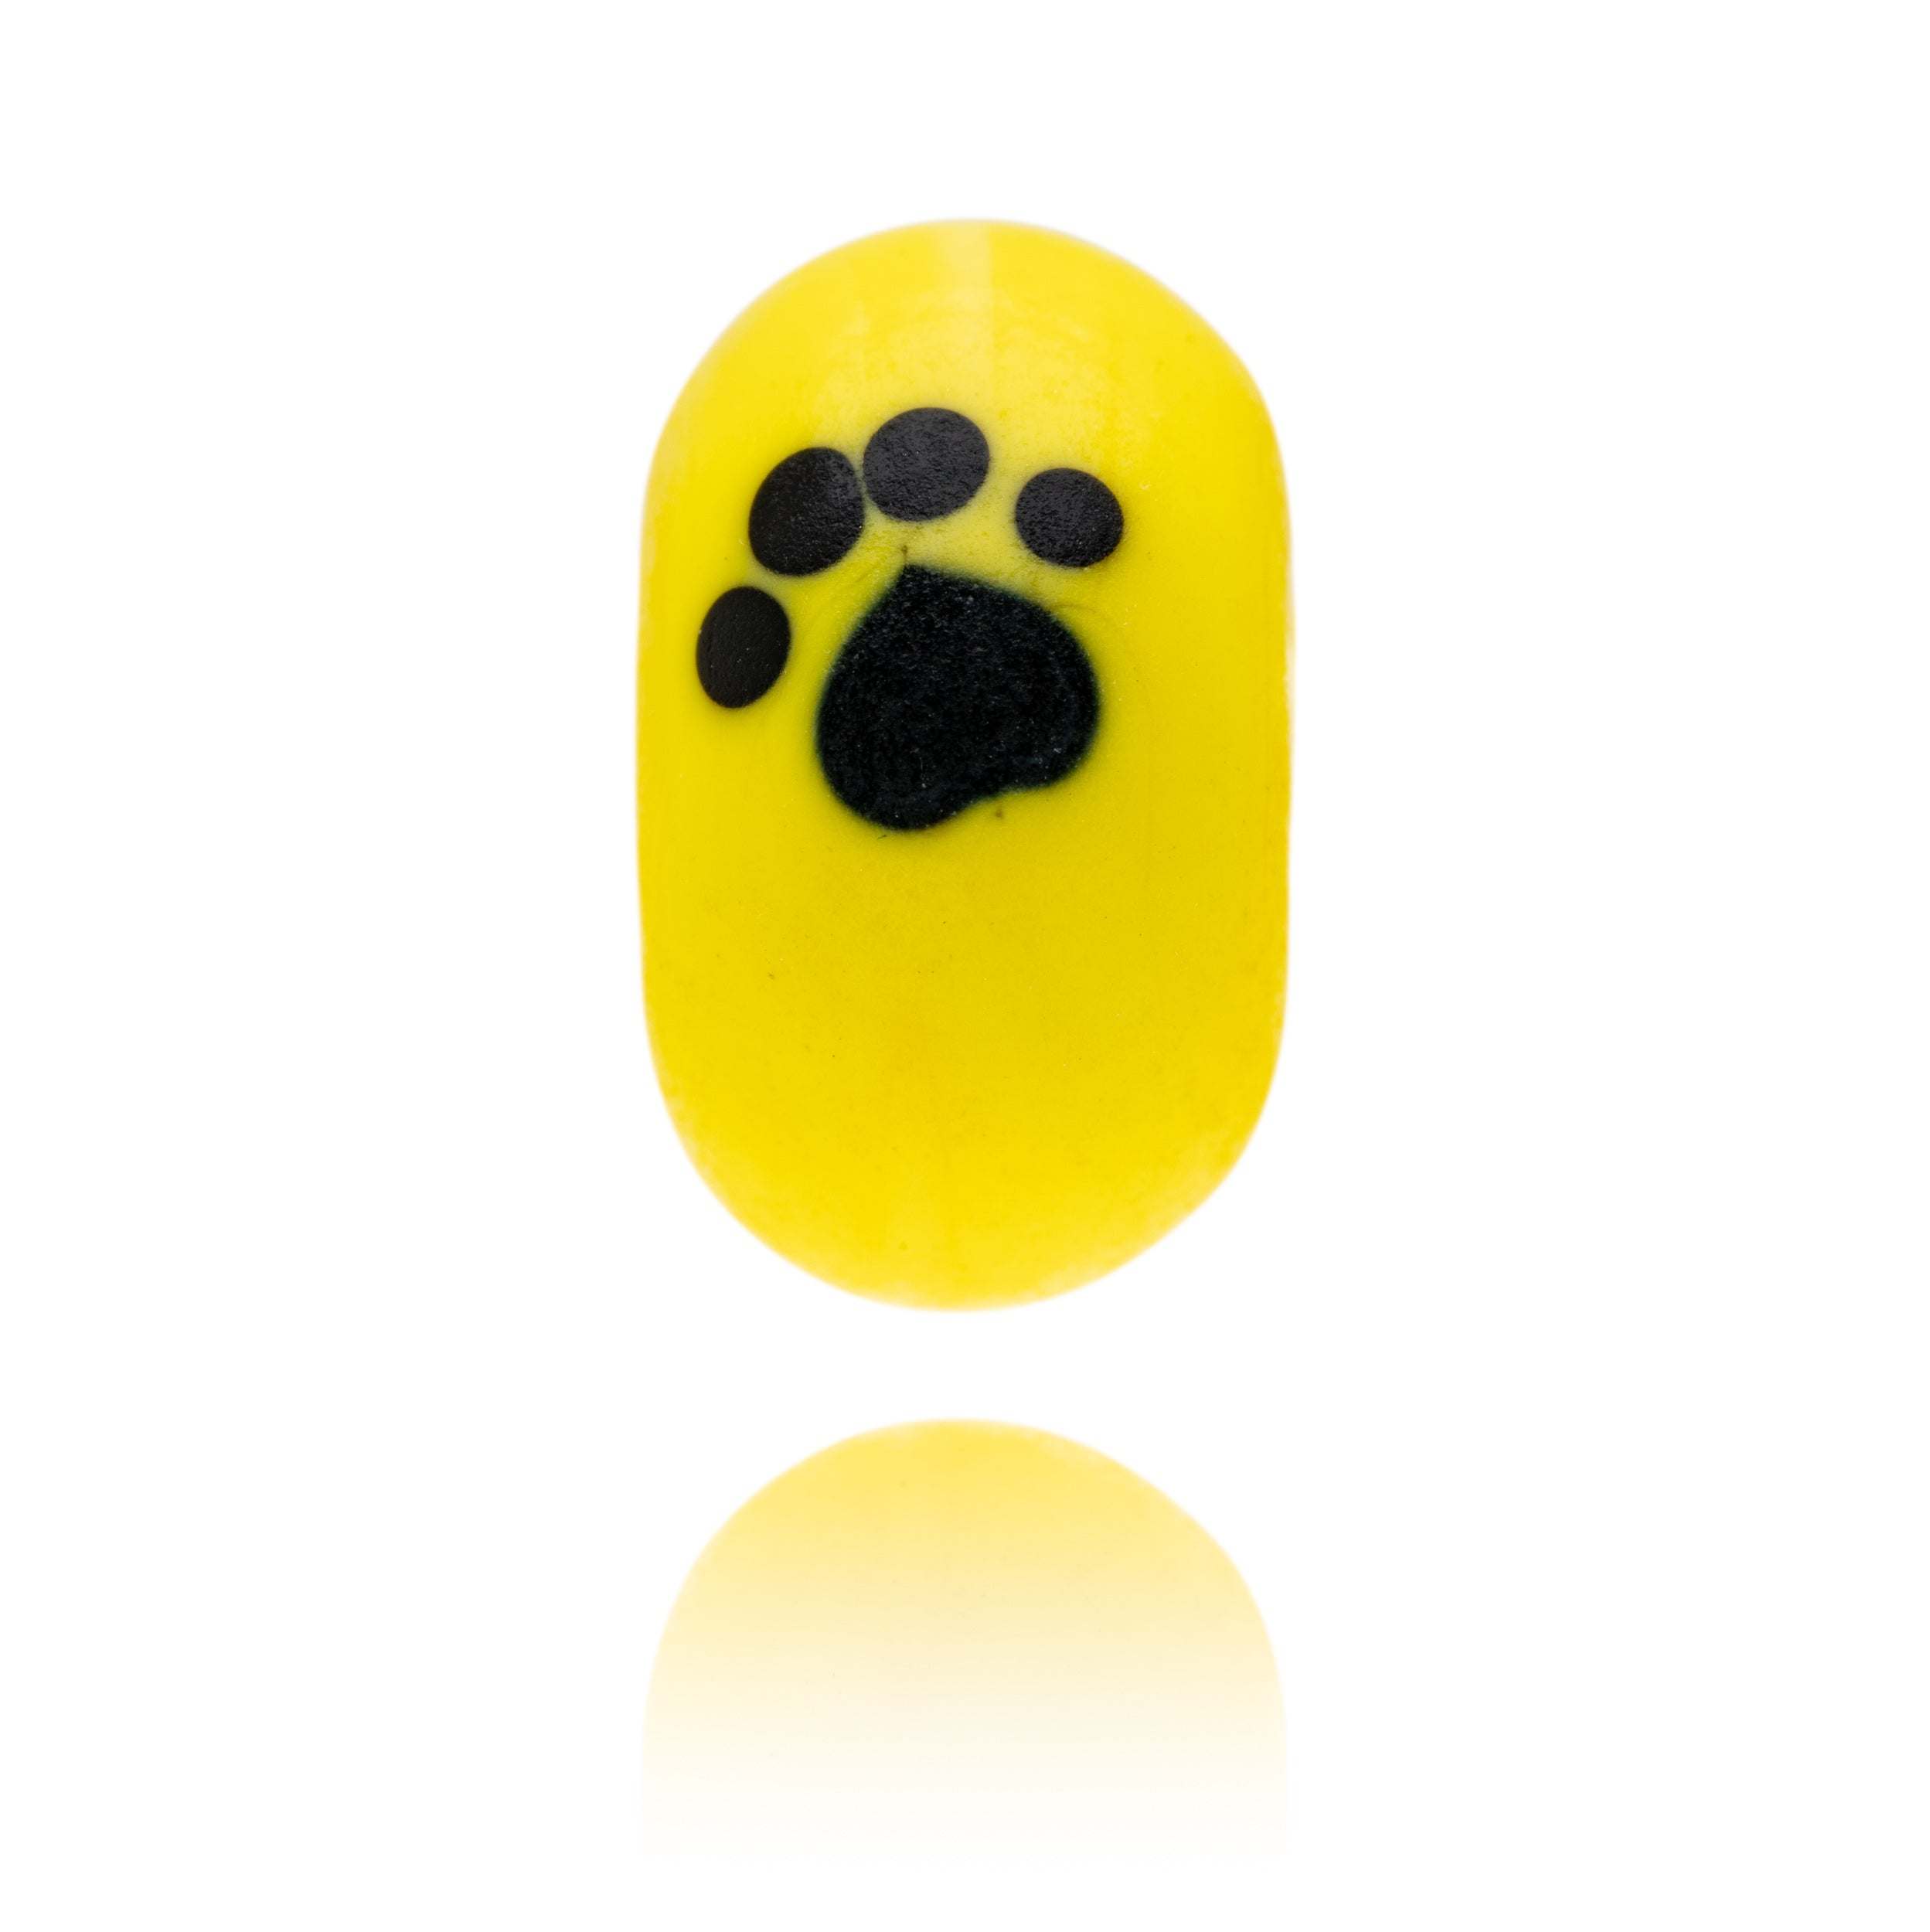 Yellow glass bead decorated with black dog paw print for the Dogs Trust.